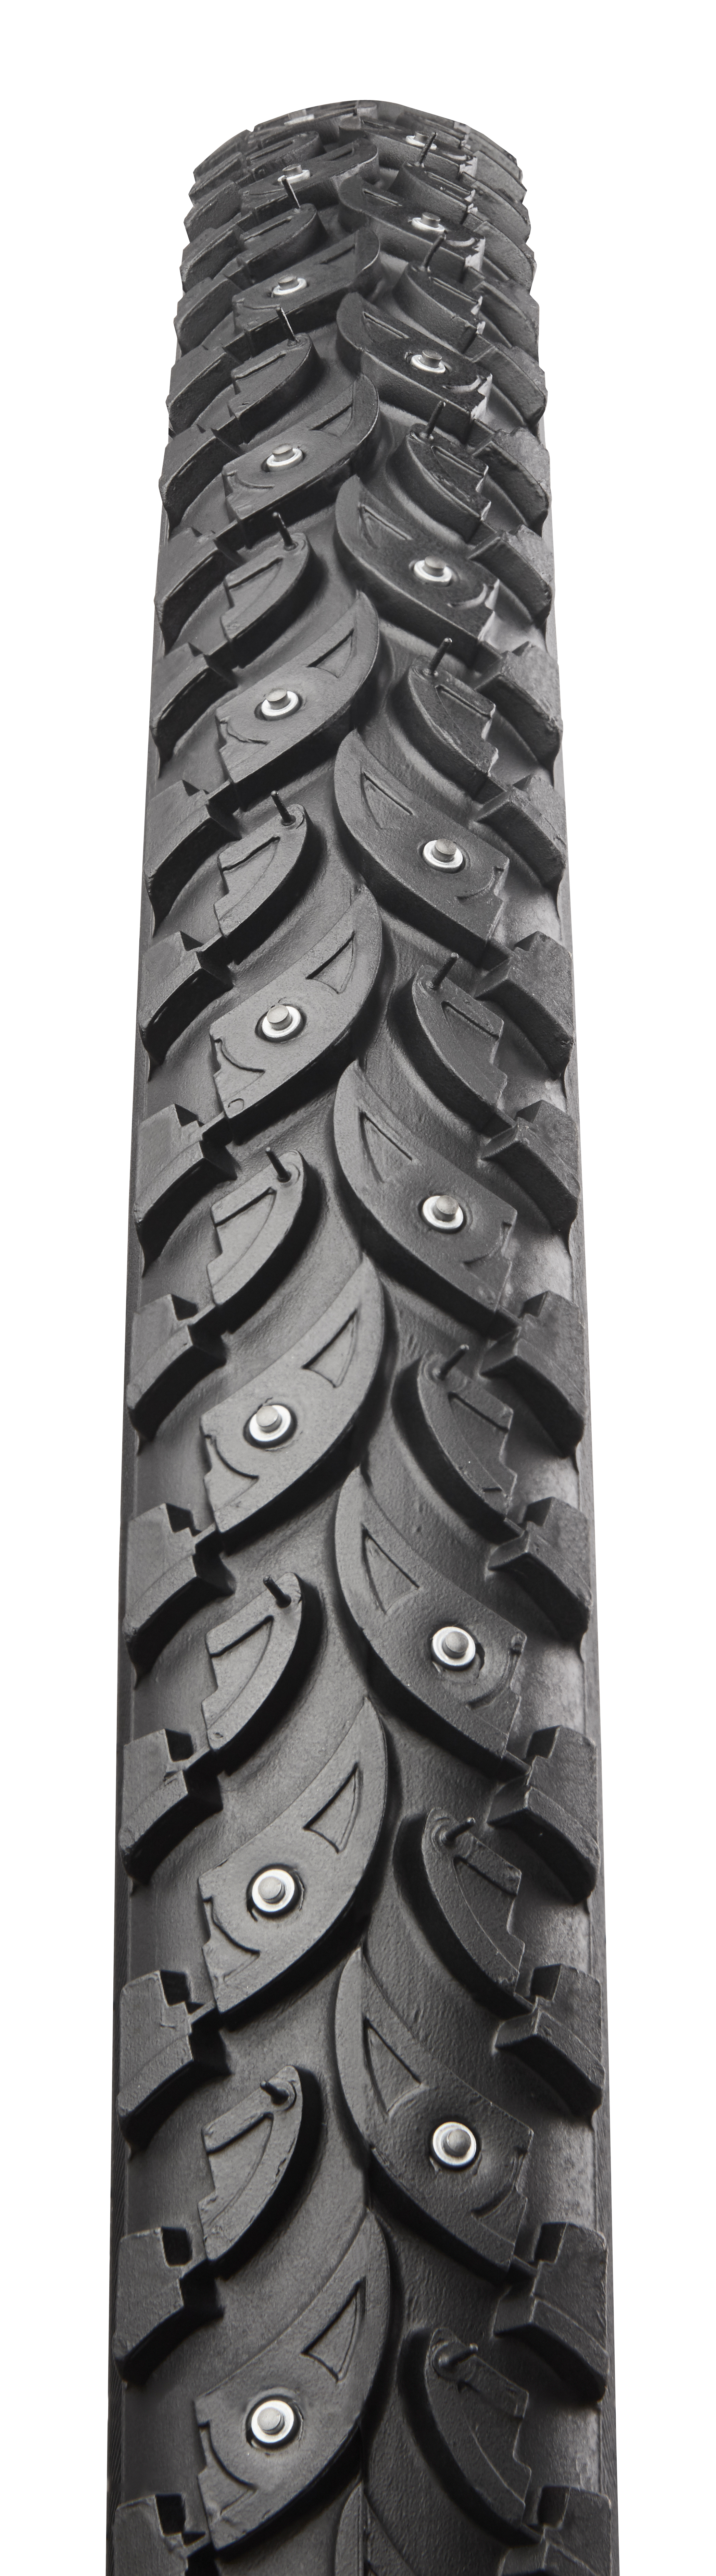 Suomi Tyres Kide W106 37-622